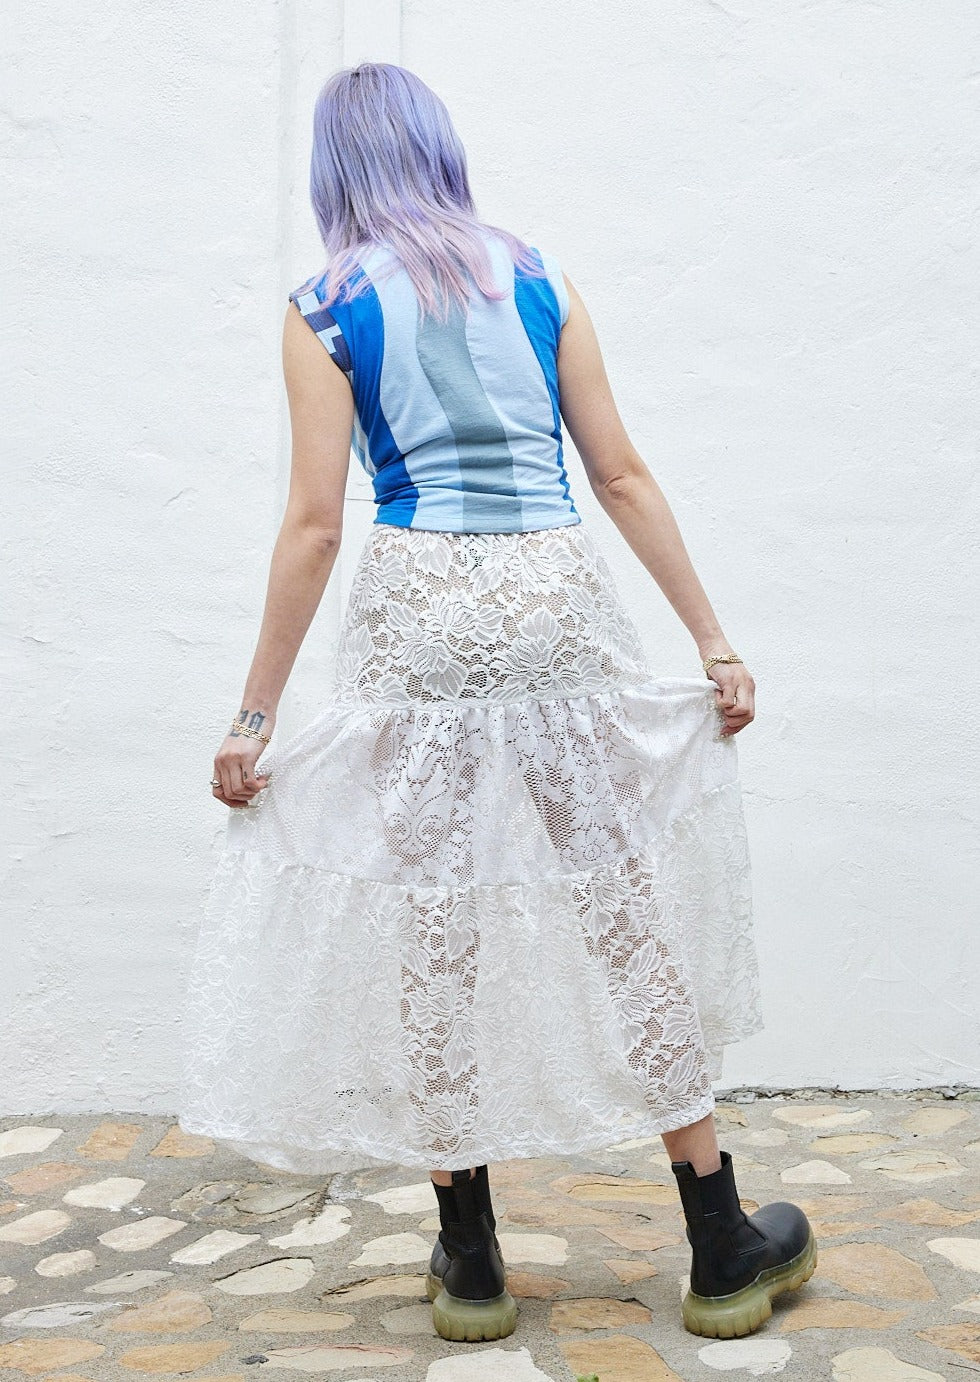 The Lace Skirt